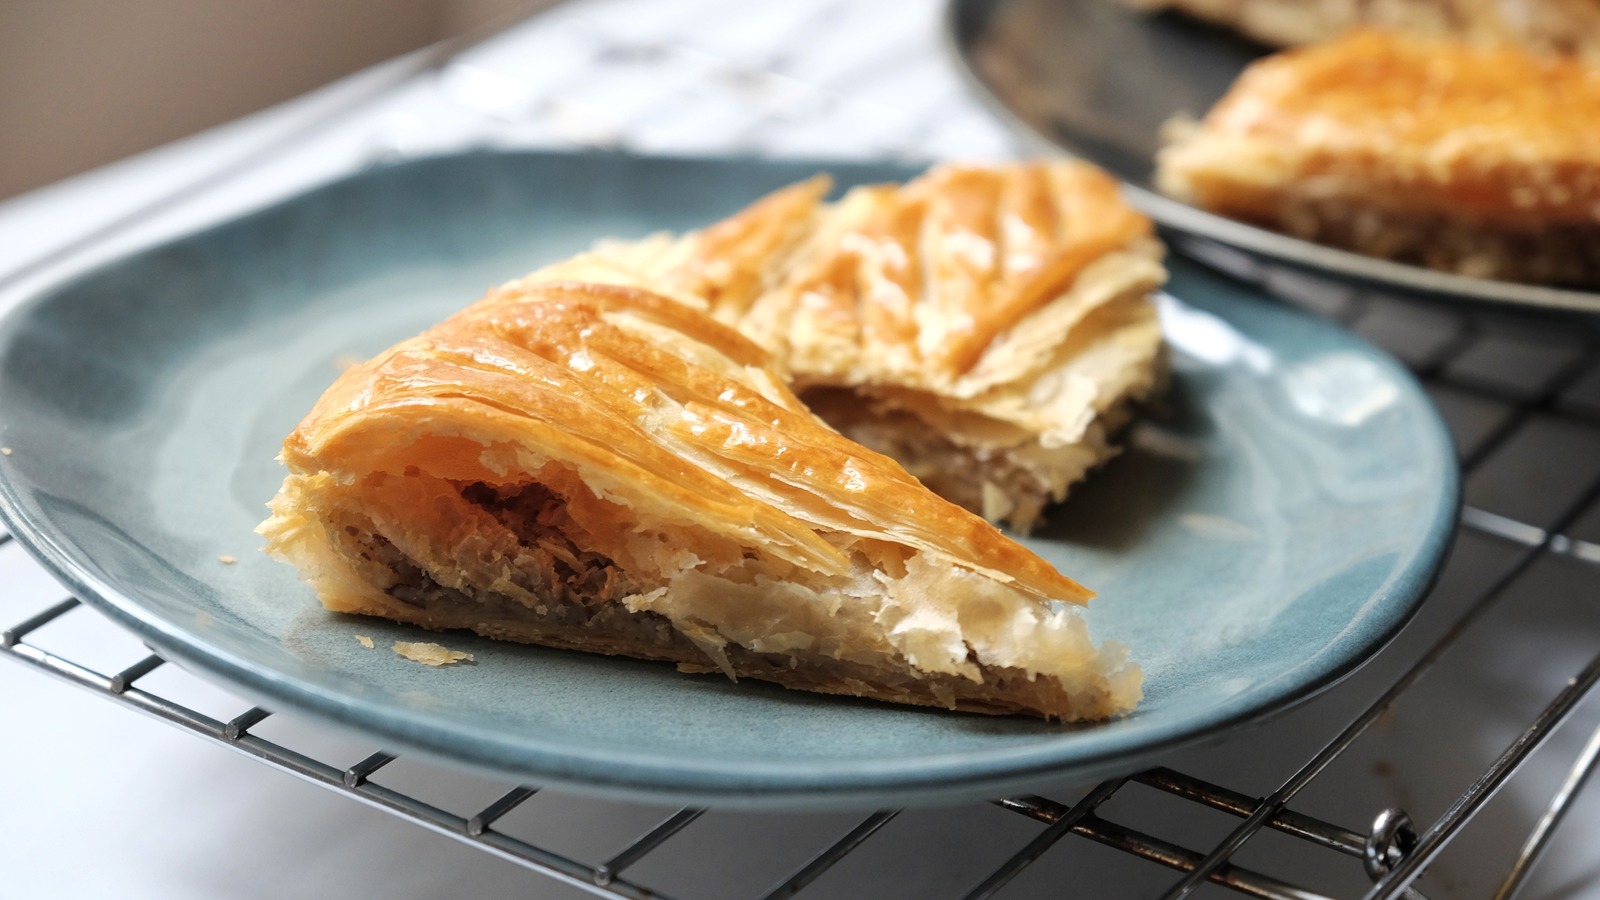 Galette des Rois Recipe (French Kings Cake) - The Cooking Foodie